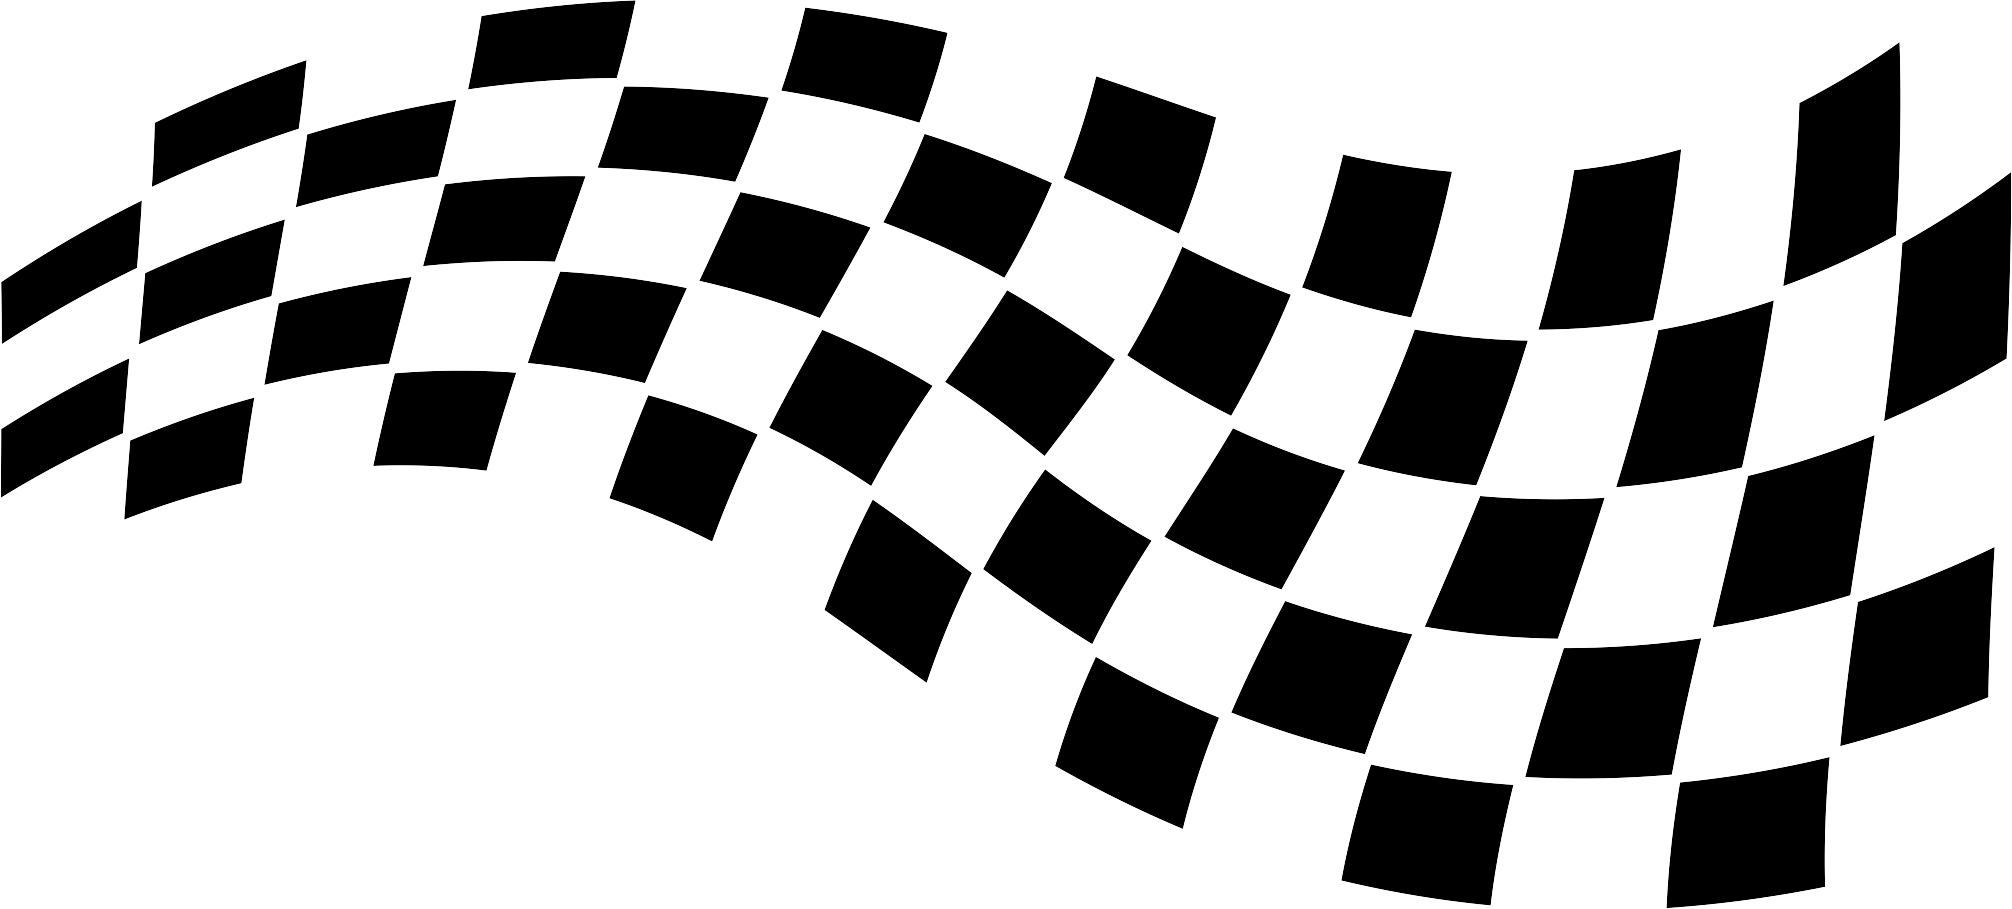 A Black Background With Squares